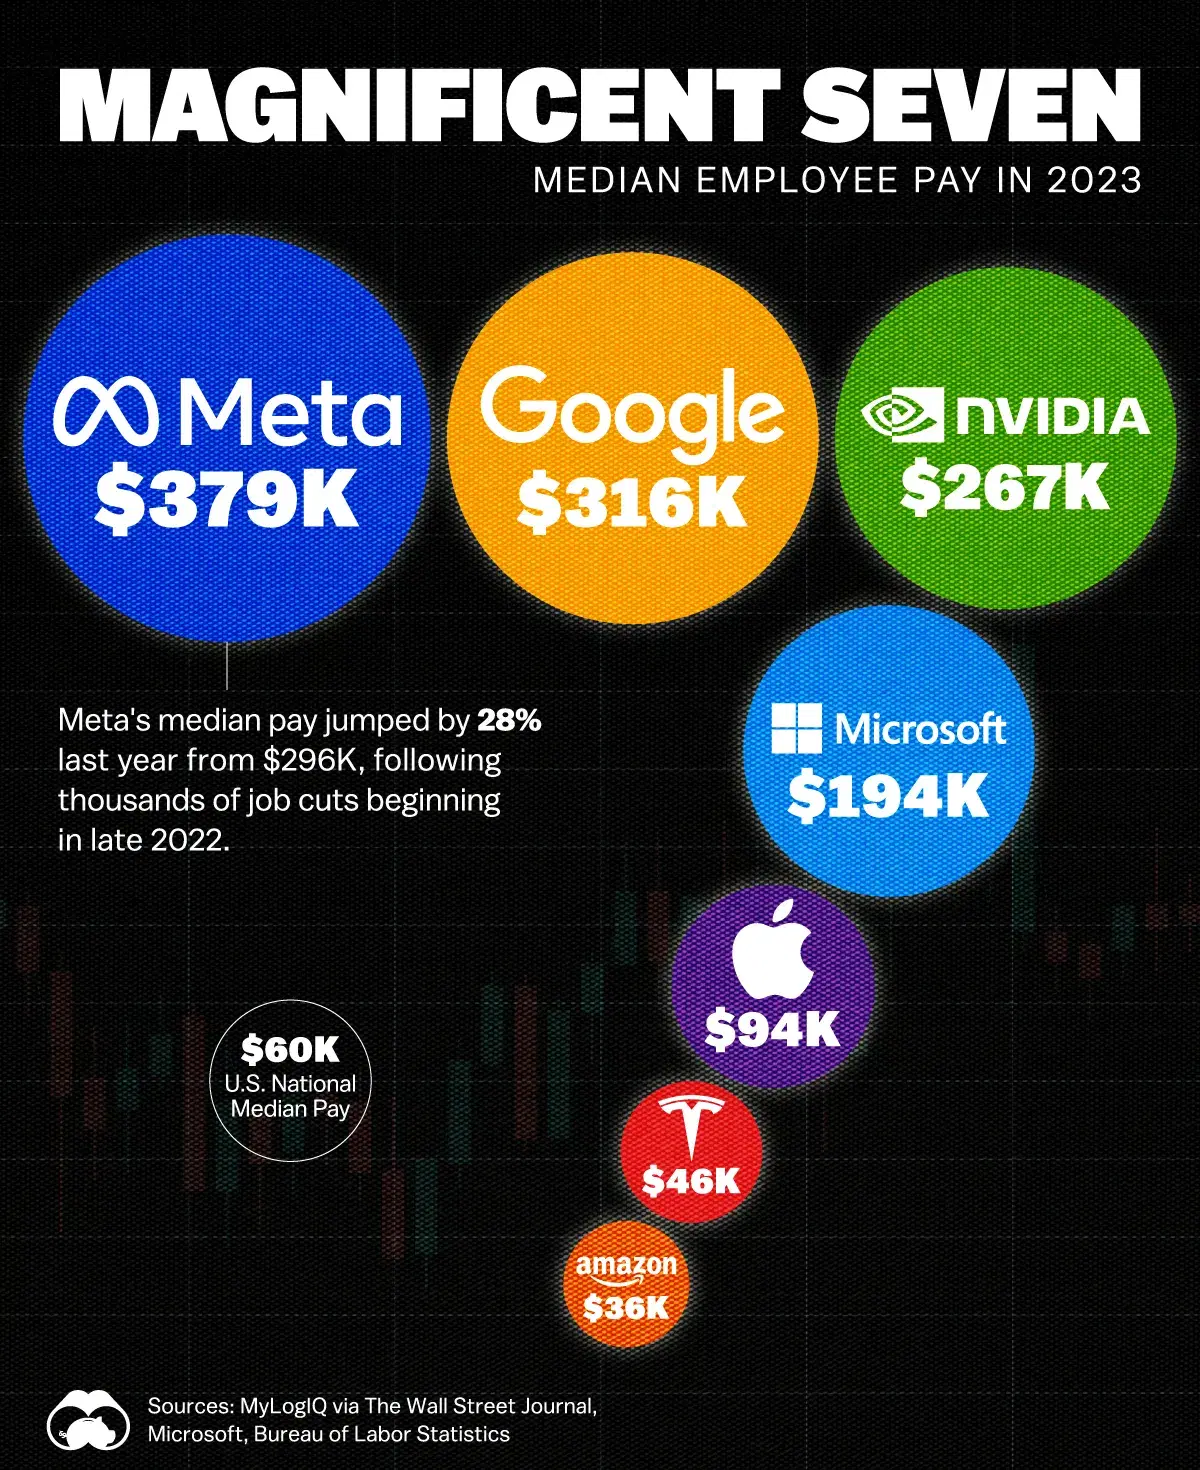 Magnificent Seven Median Employee Pay in 2023